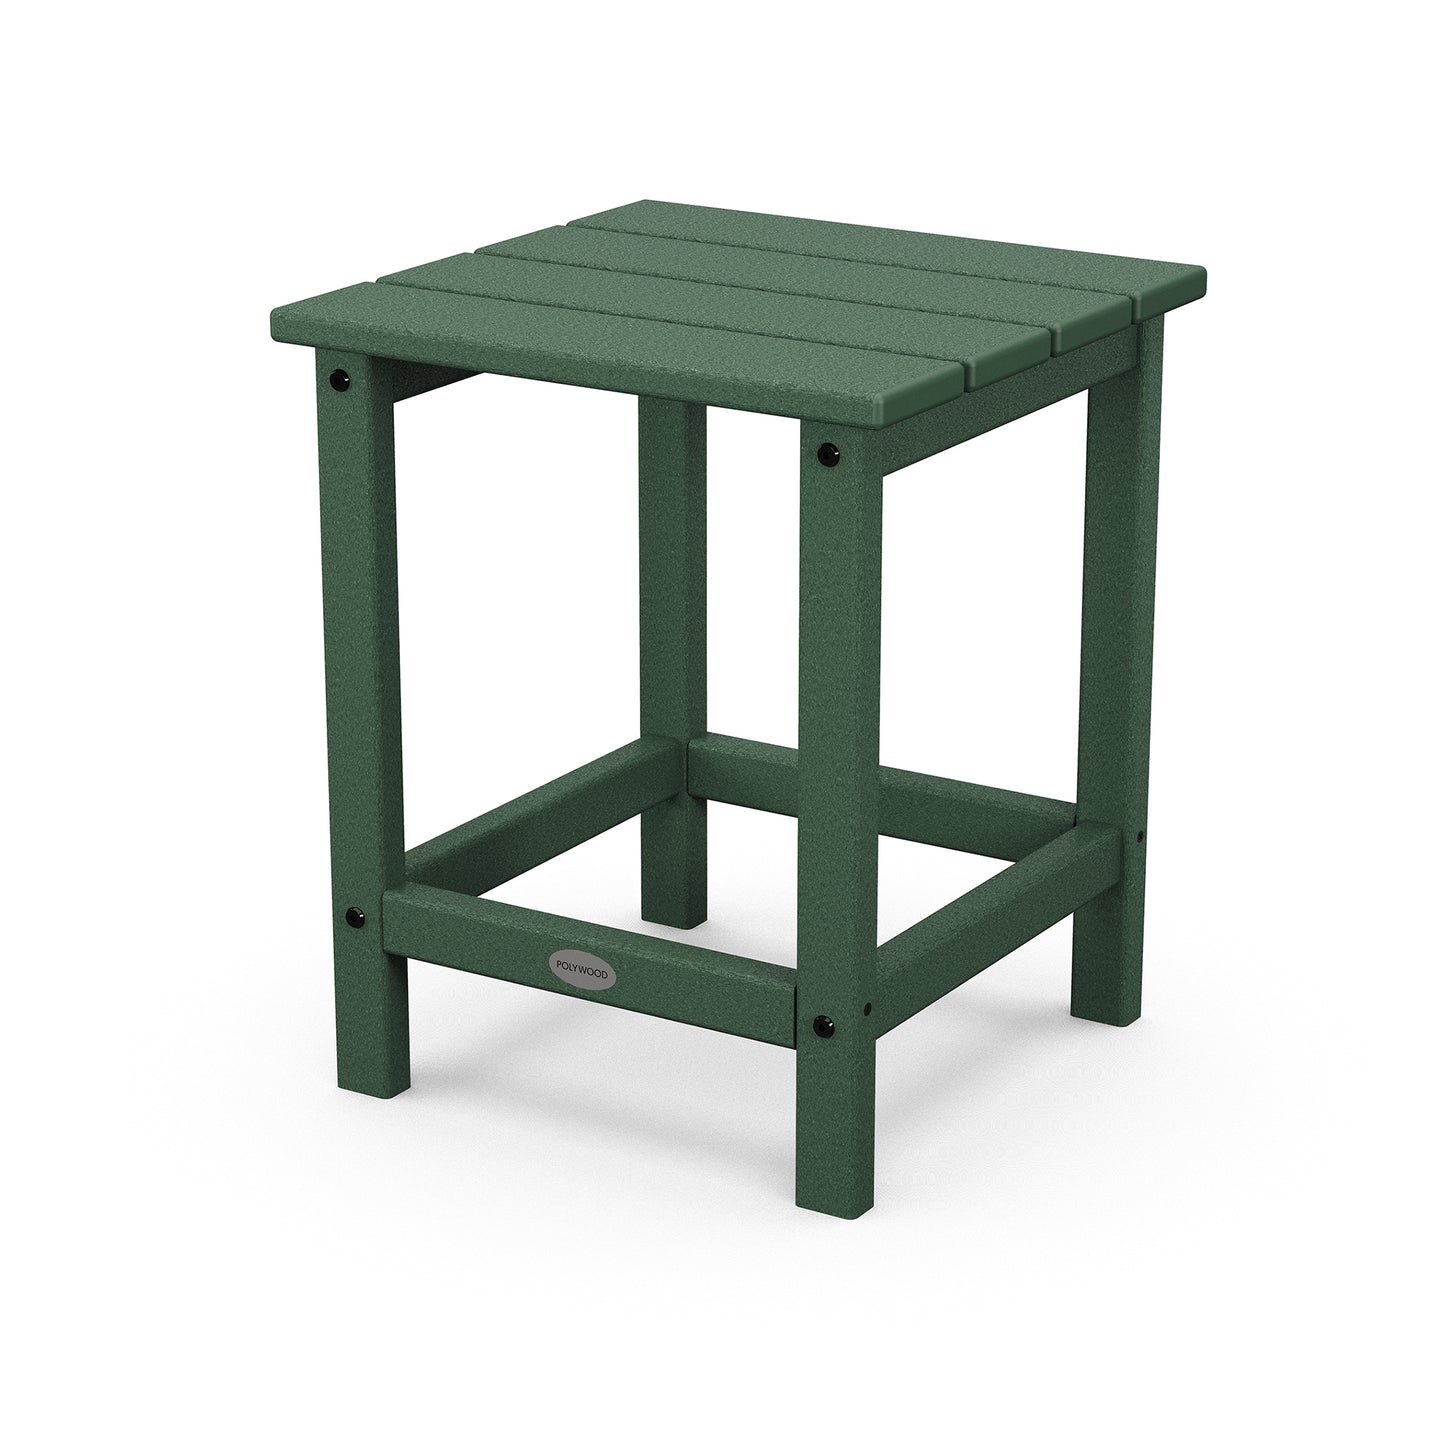 A 3D rendering of a simple green POLYWOOD Long Island 18" outdoor side table with a square top, supported by four sturdy legs connected by a lower shelf, set against a plain white background.